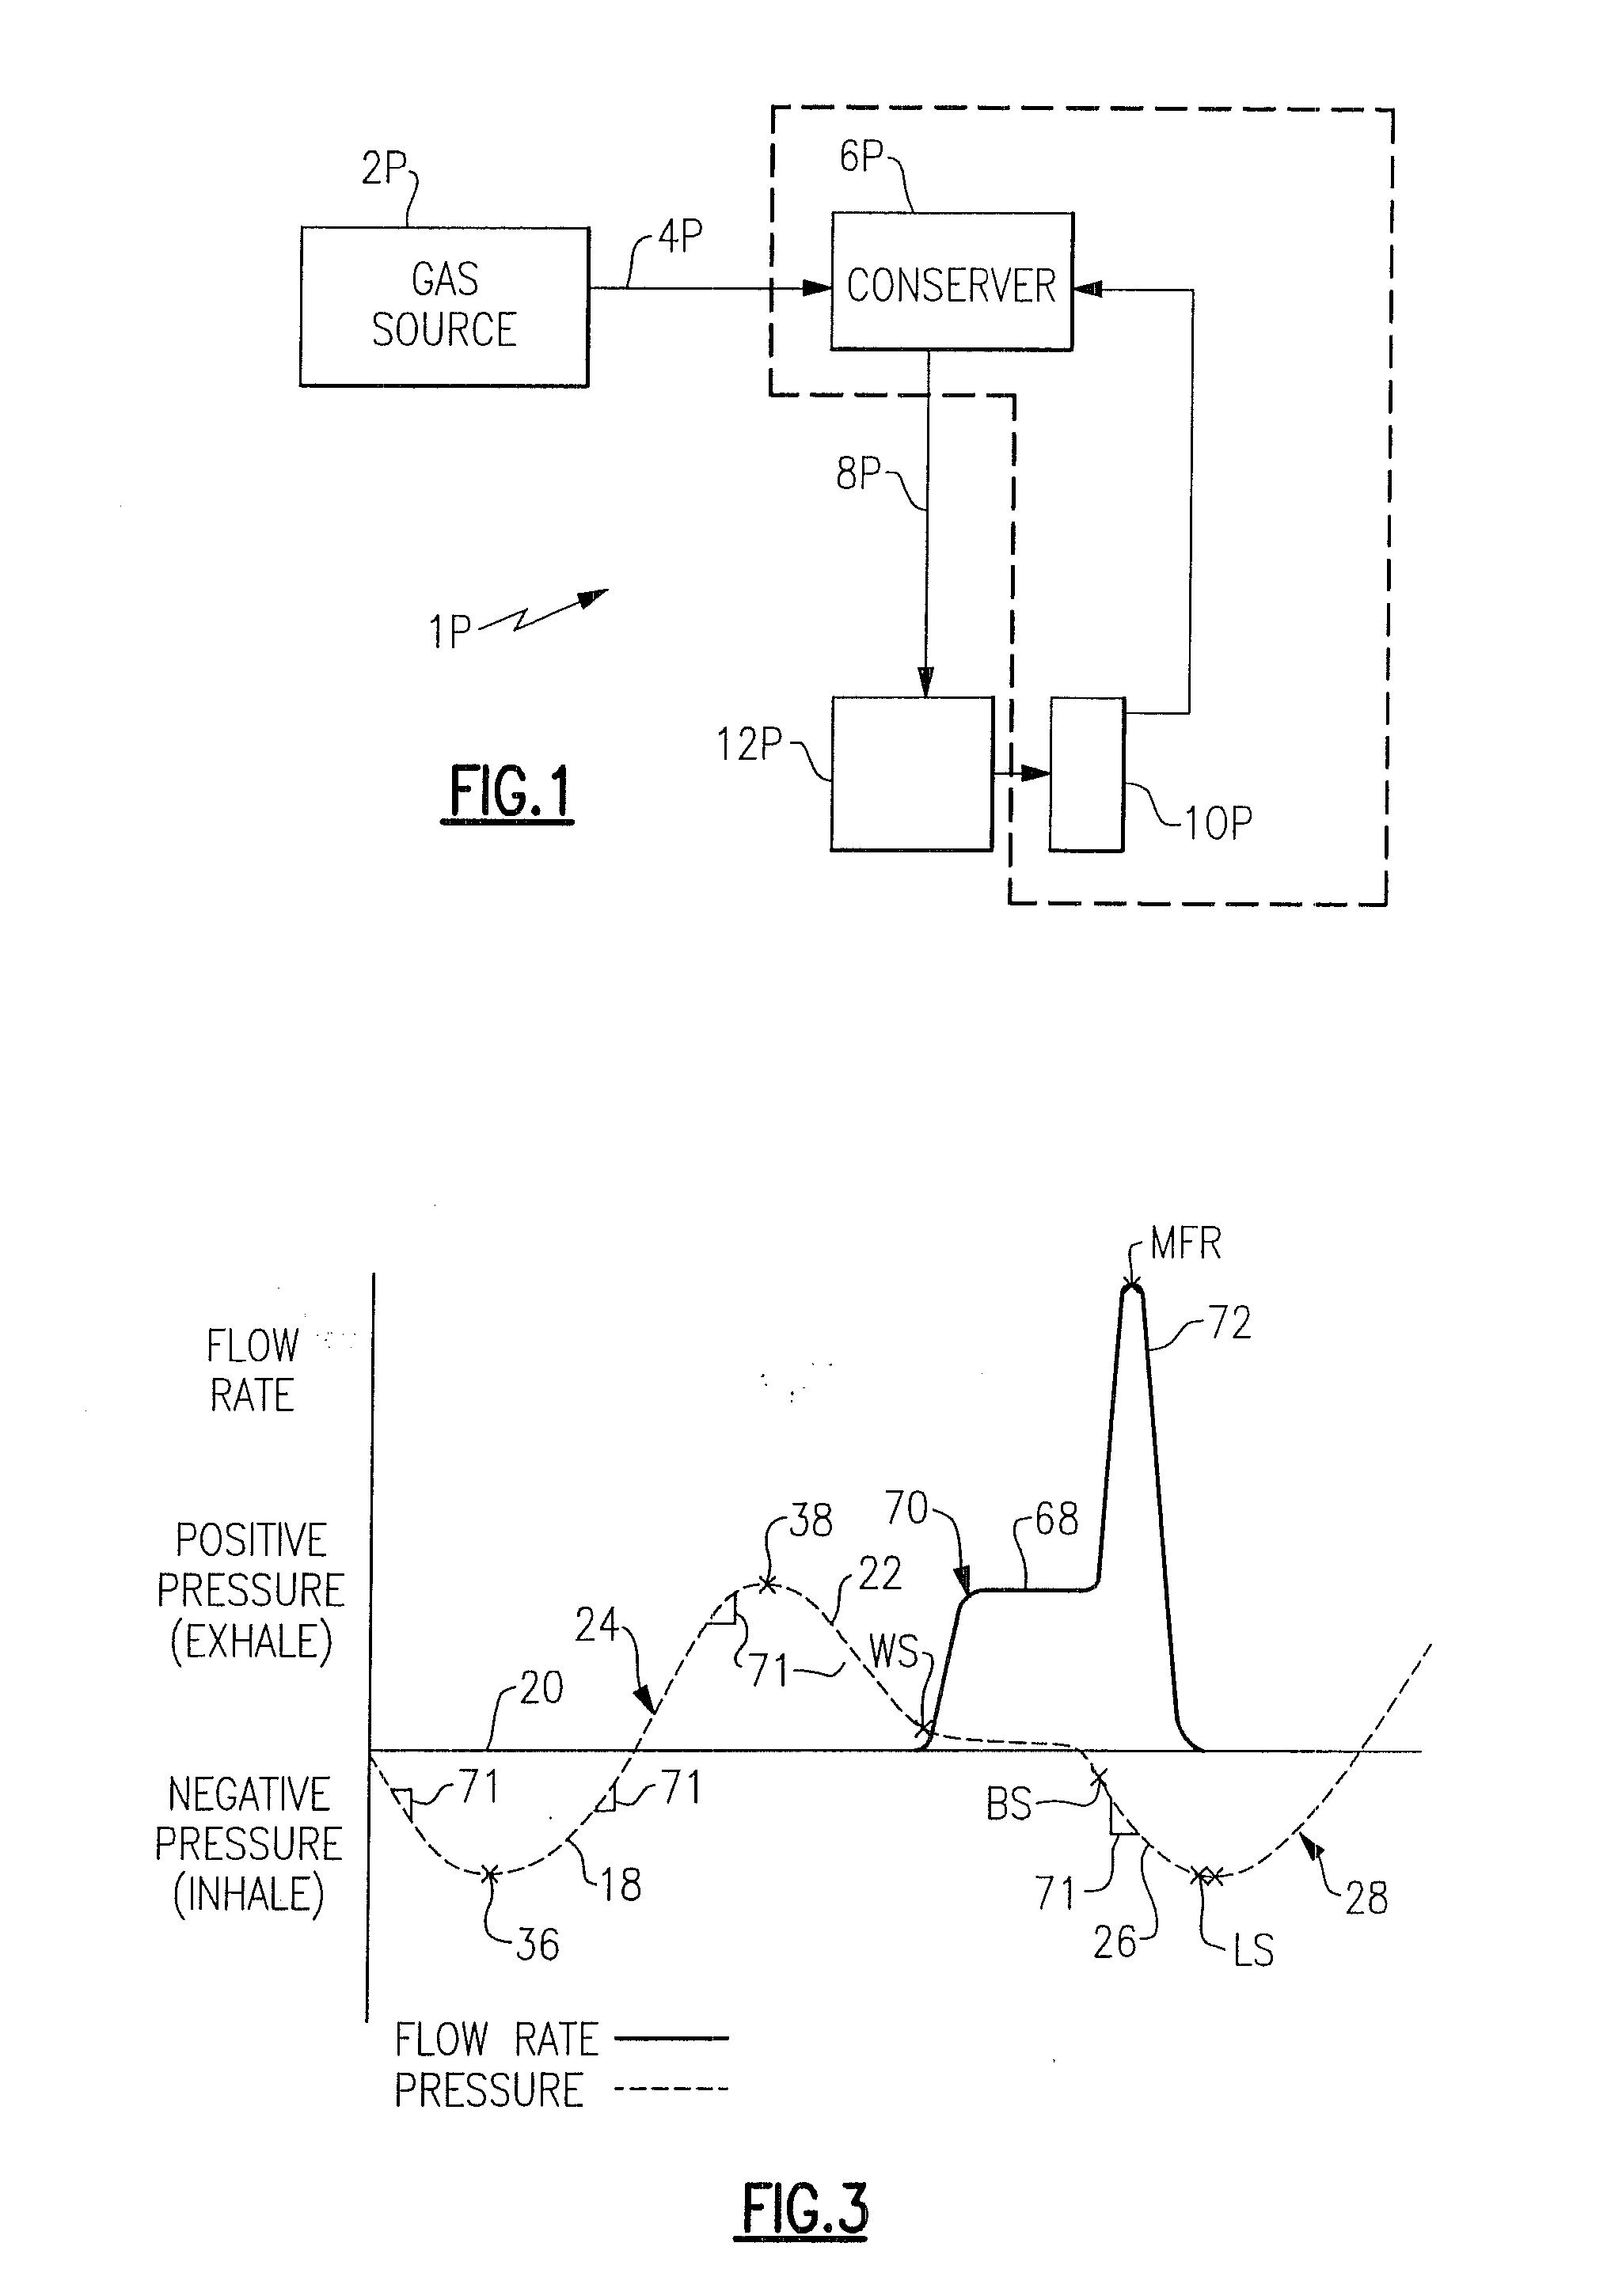 System and method for conserving oxygen delivery while maintaining saturation